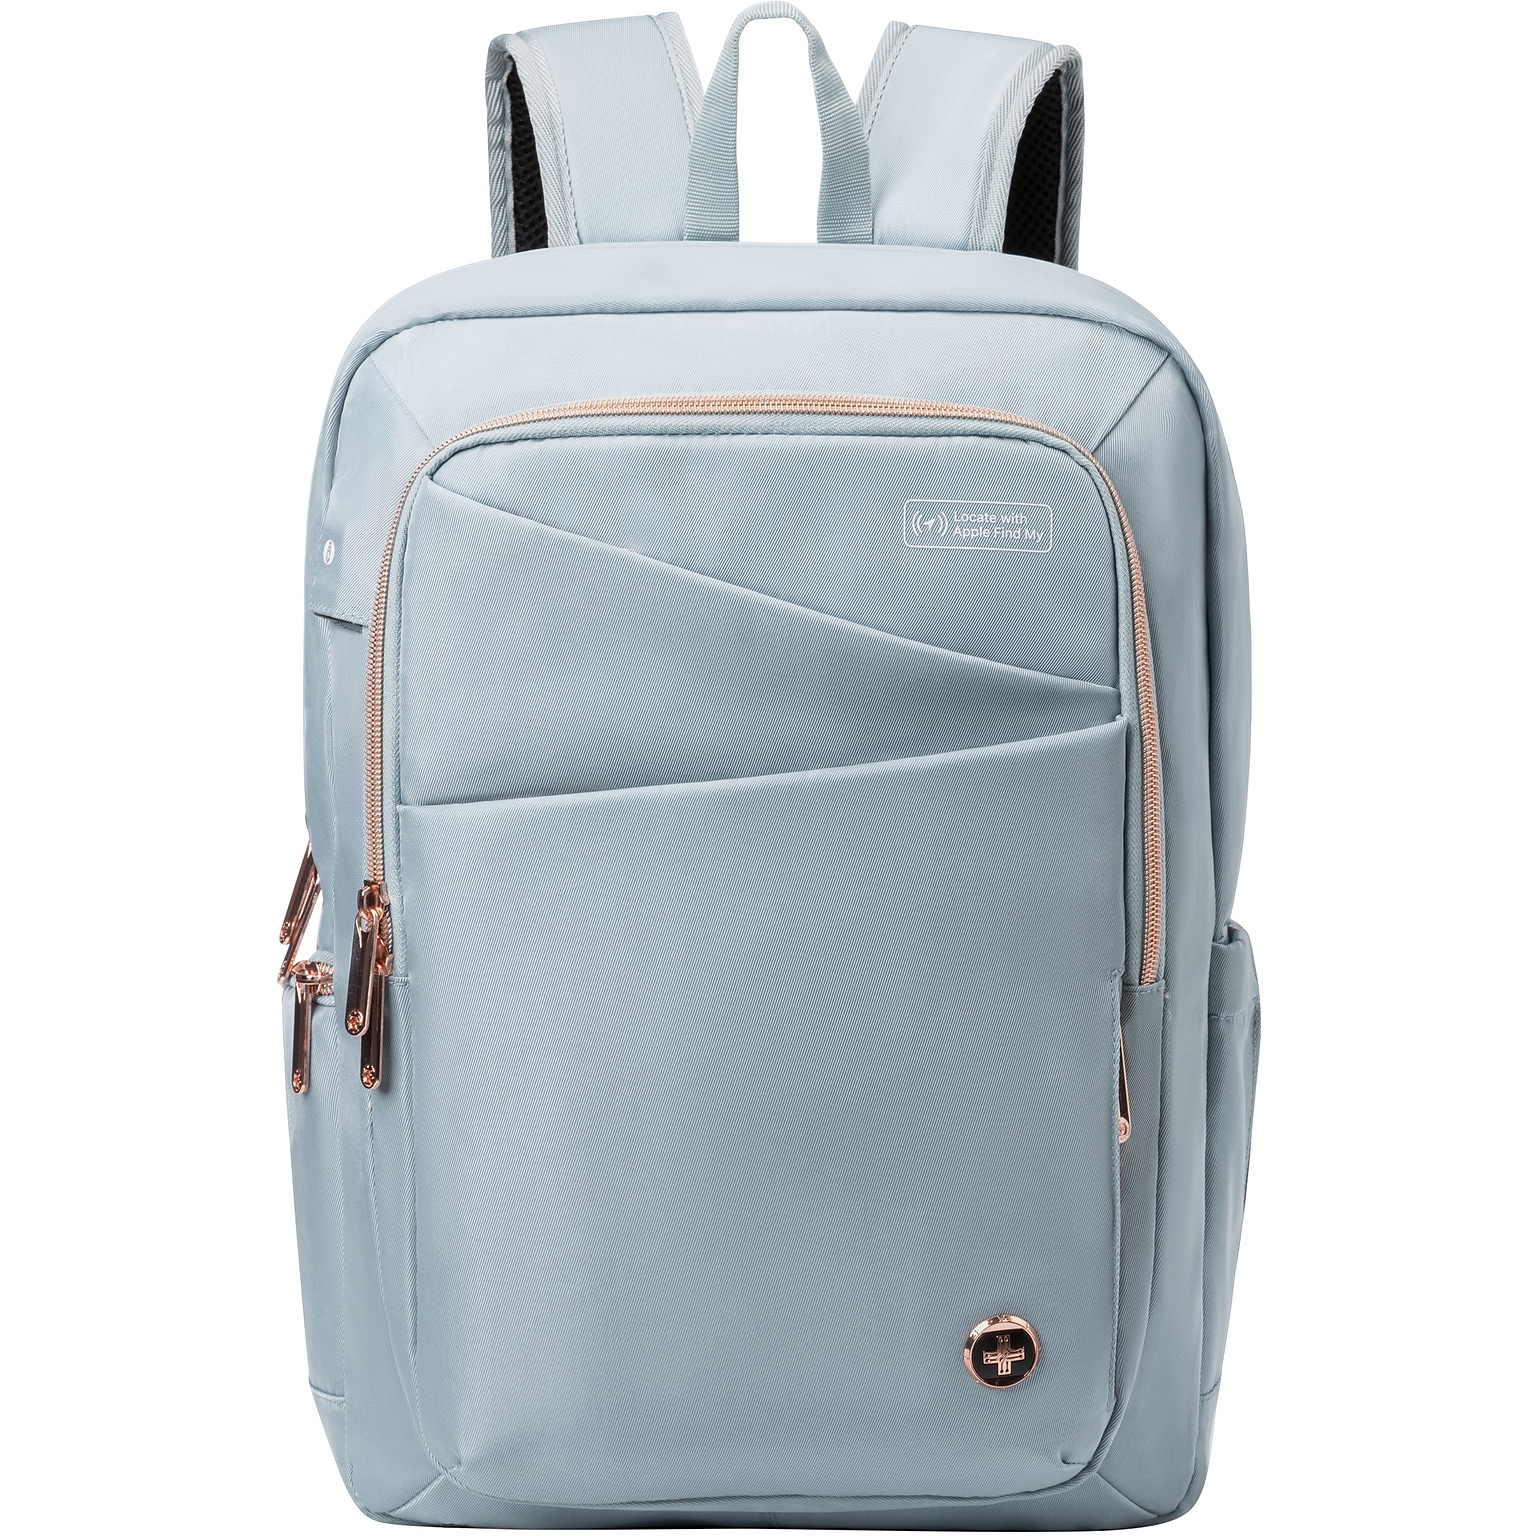 Swissdigital Design KATY ROSE with Find My built-in Backpack, Teal Blue (SD1006FB-14)